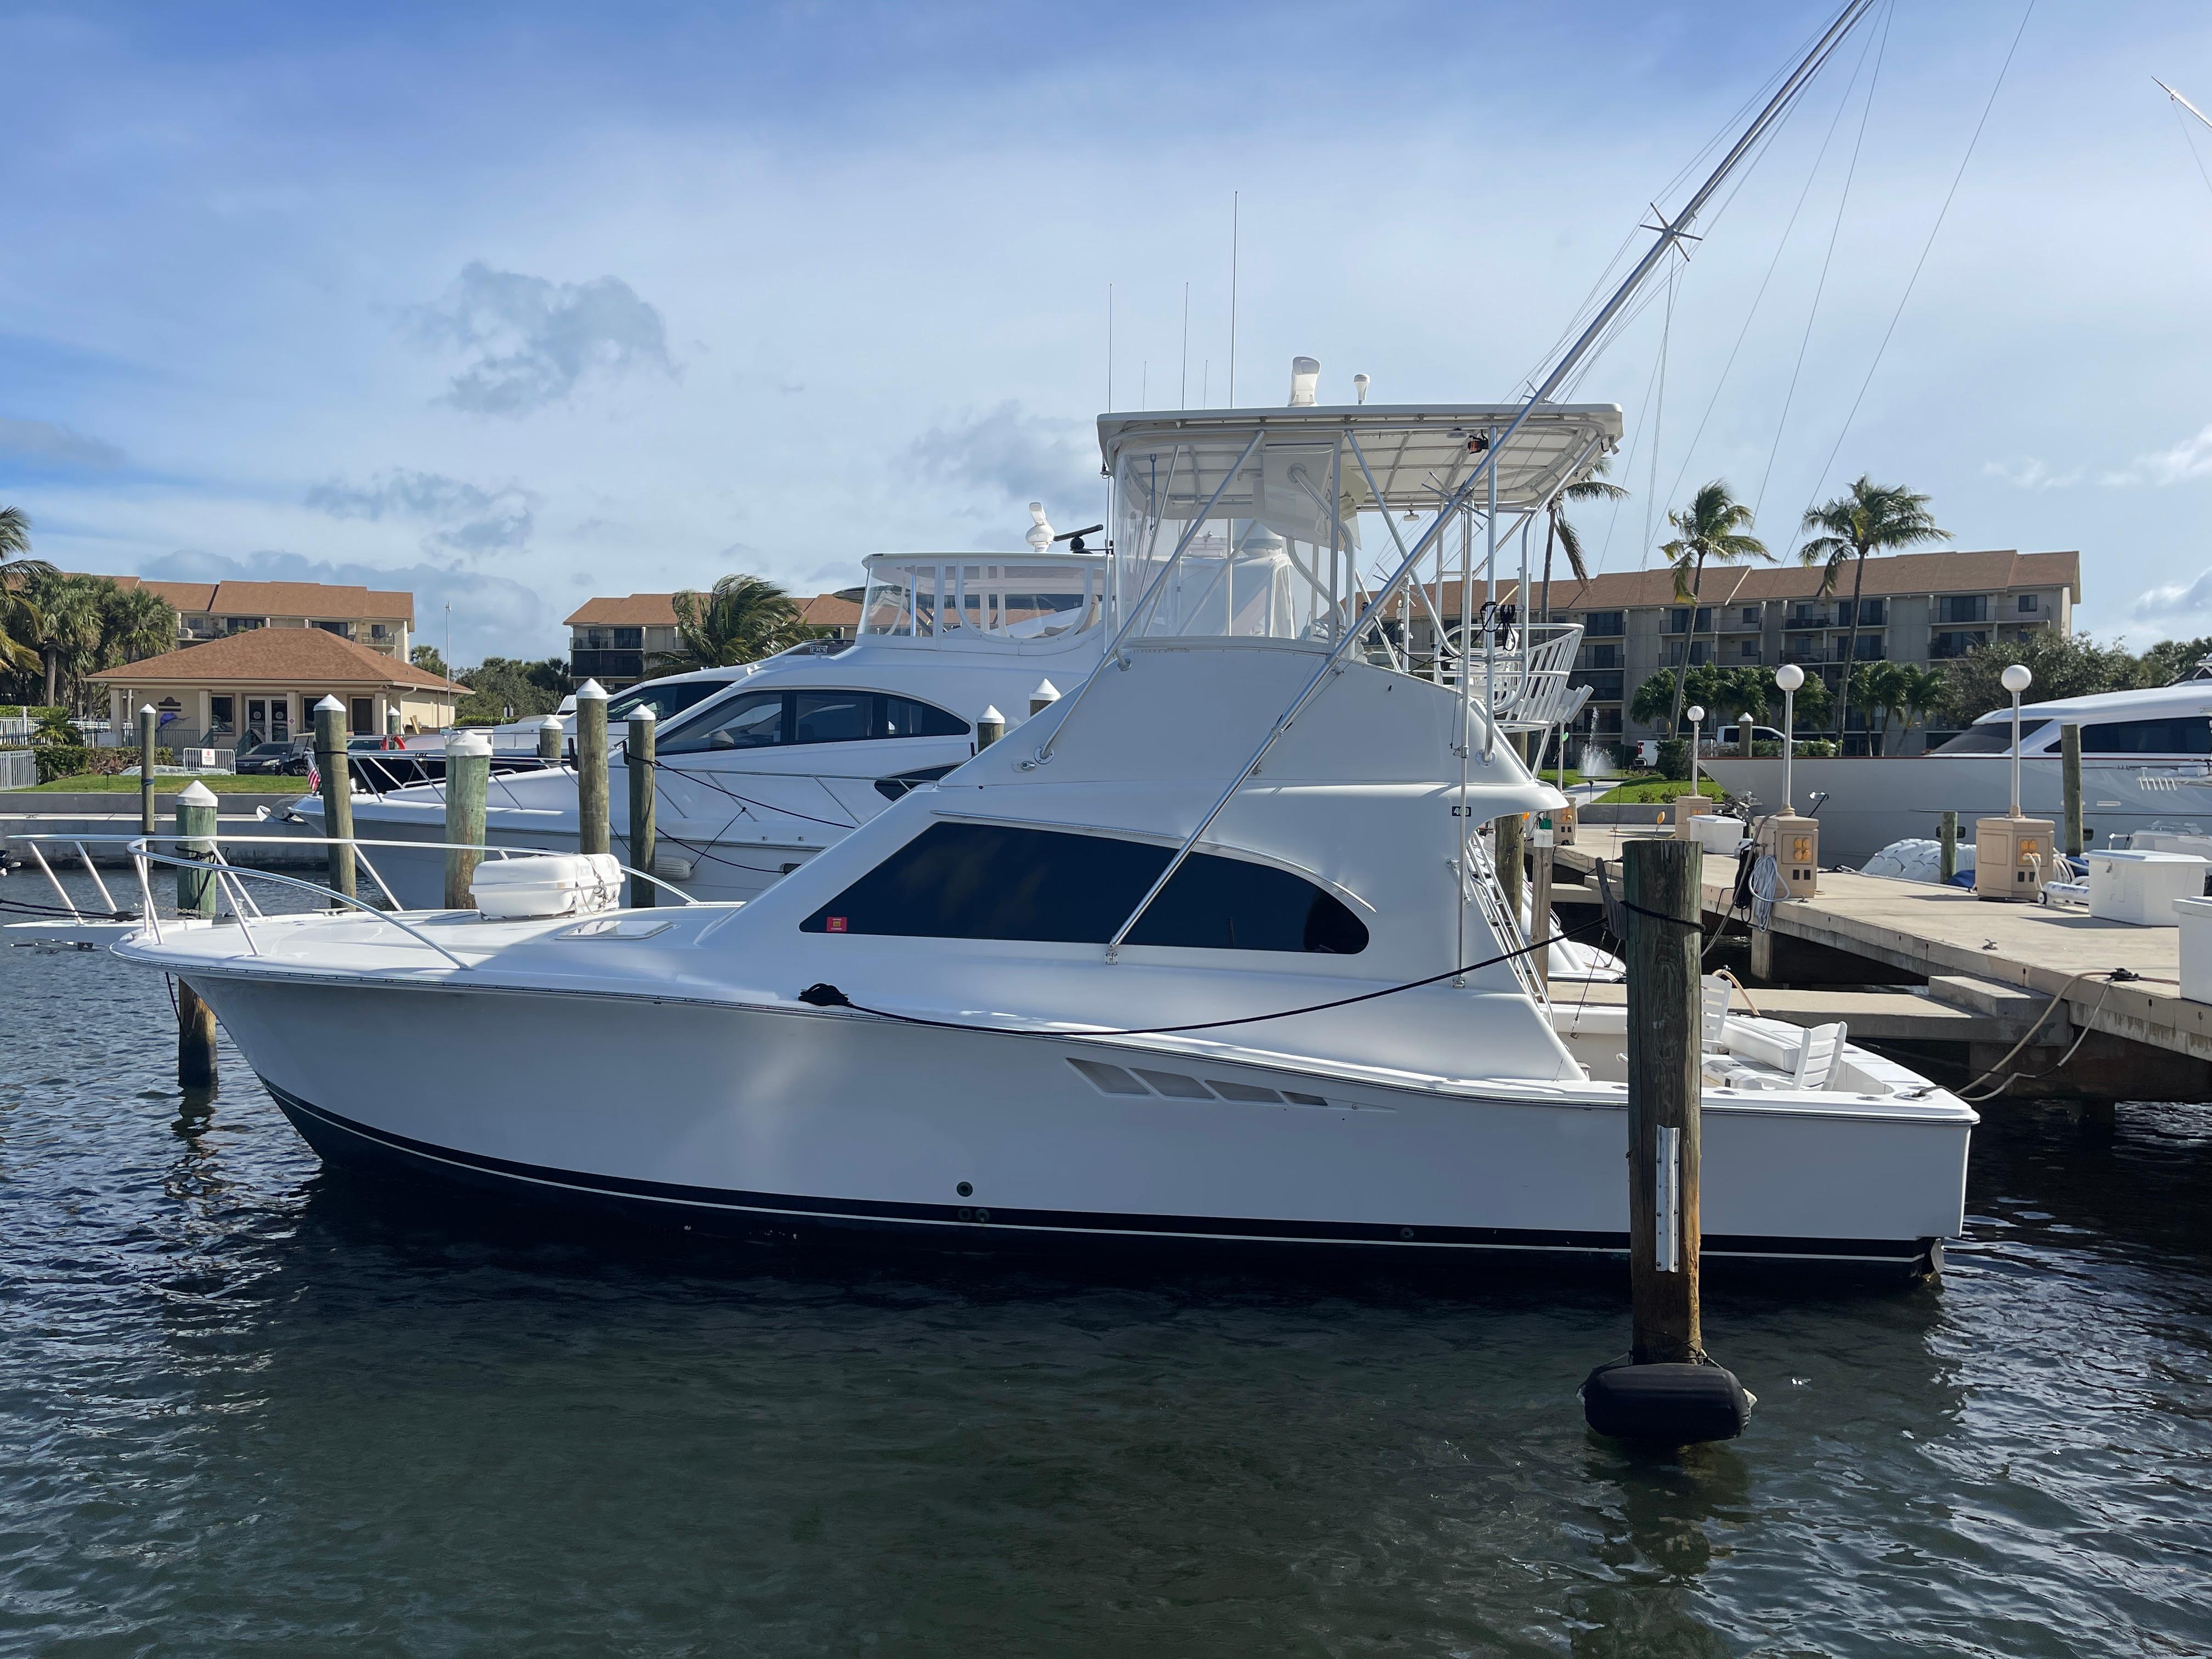 Hooked On A Feeling Yacht Photos Pics 2001 Luhrs 400 Tournament Convertible - Profile